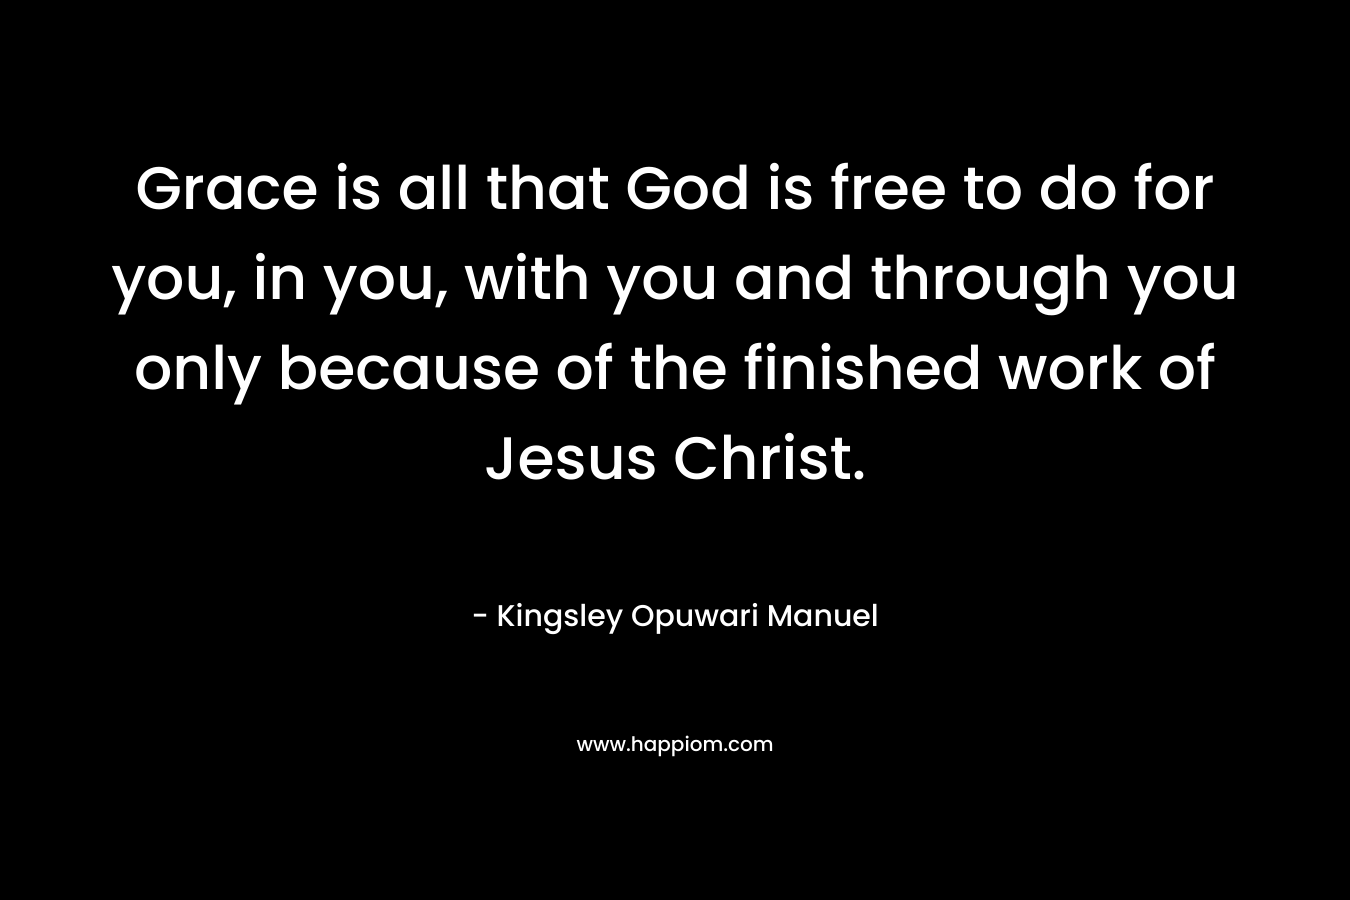 Grace is all that God is free to do for you, in you, with you and through you only because of the finished work of Jesus Christ. – Kingsley Opuwari Manuel